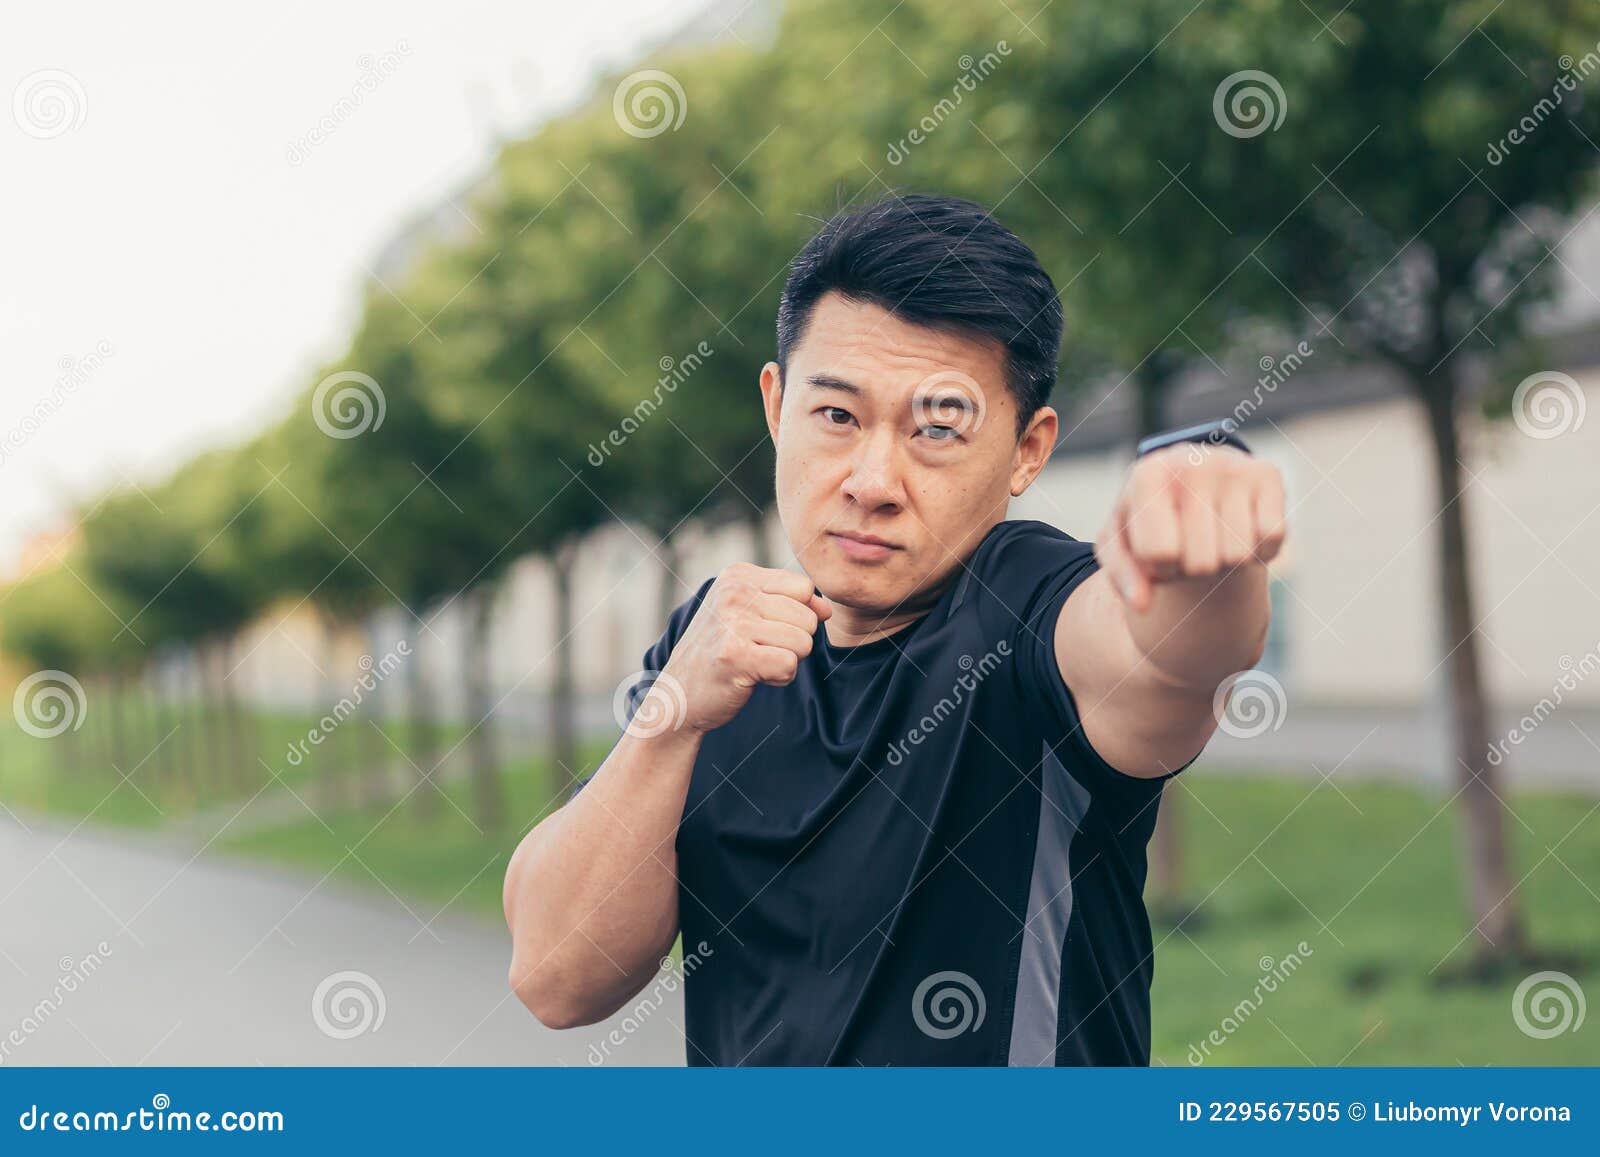 Male Asian Athlete Demonstrates Boxing Rack during Morning Jogging and ...